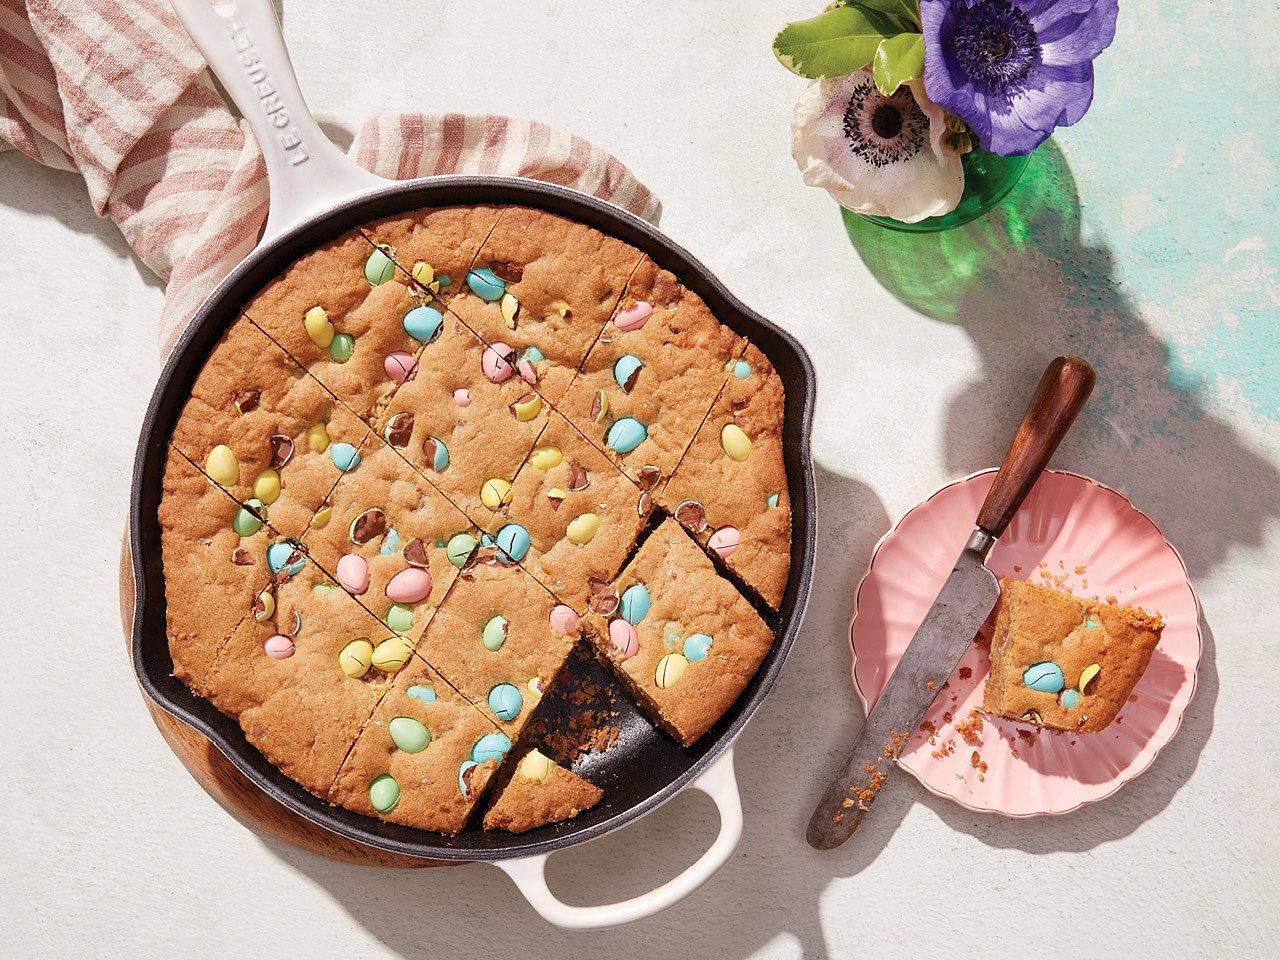 a skillet cookie in a pink cast iron pan cut into squares. a piece is taken out